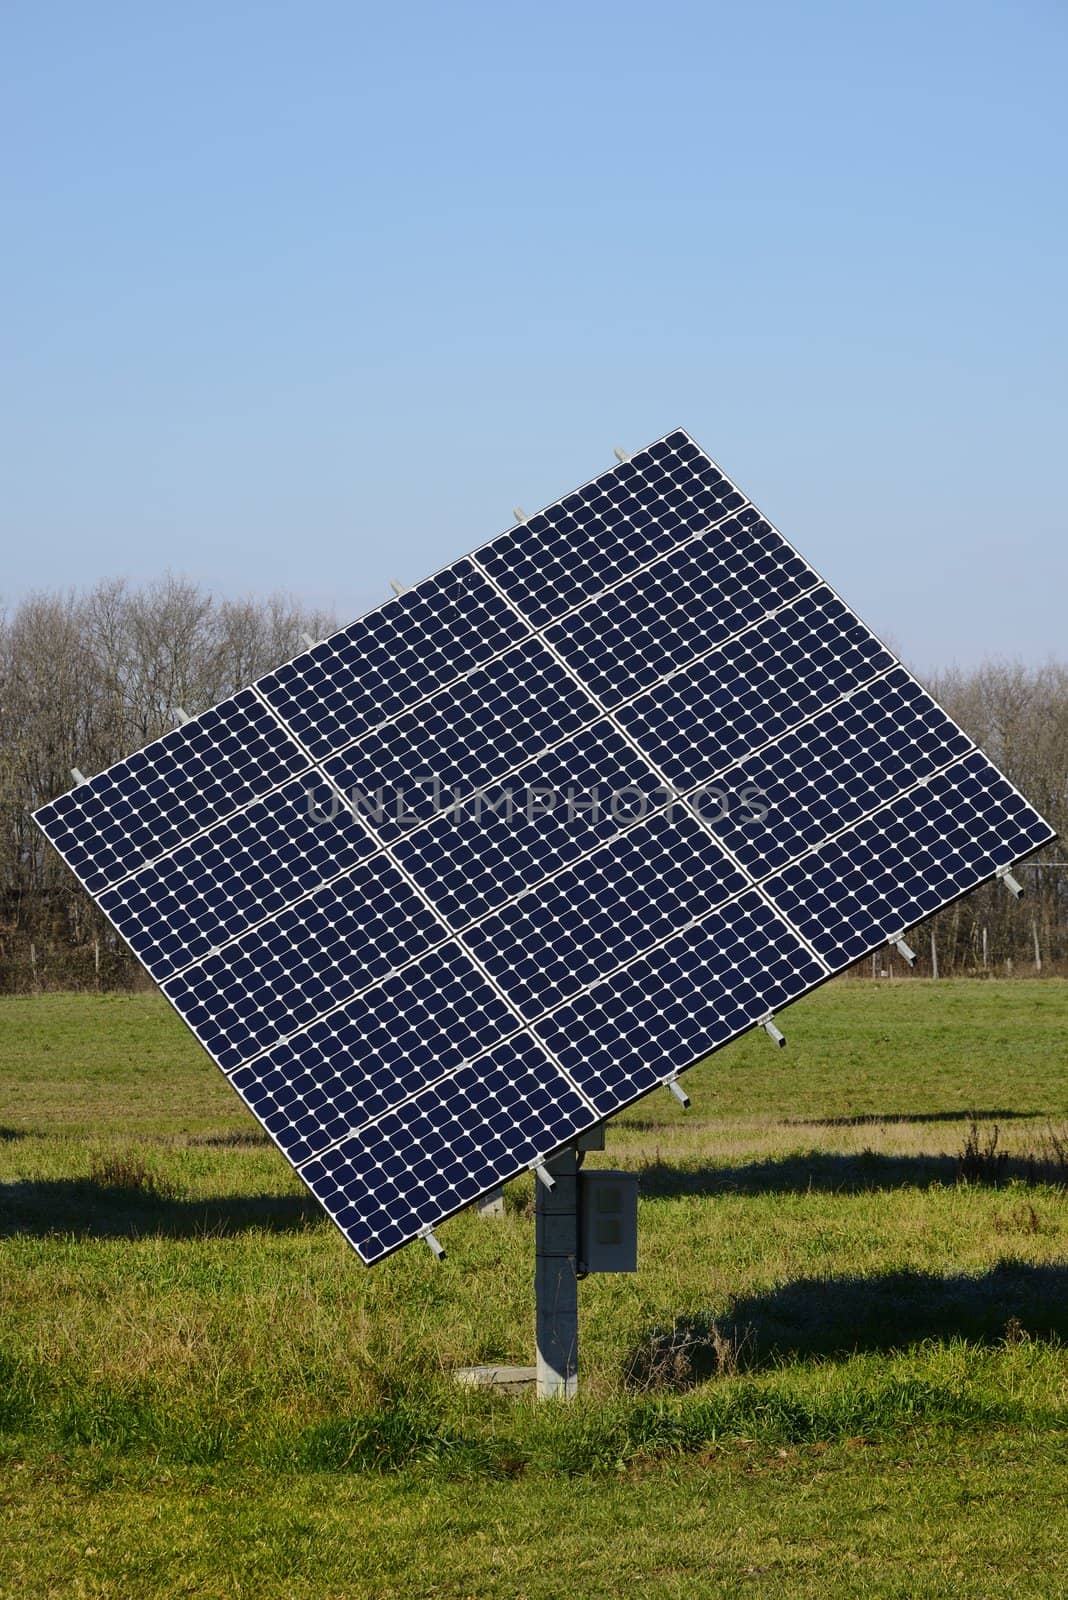 A Bright solar panel in the nature